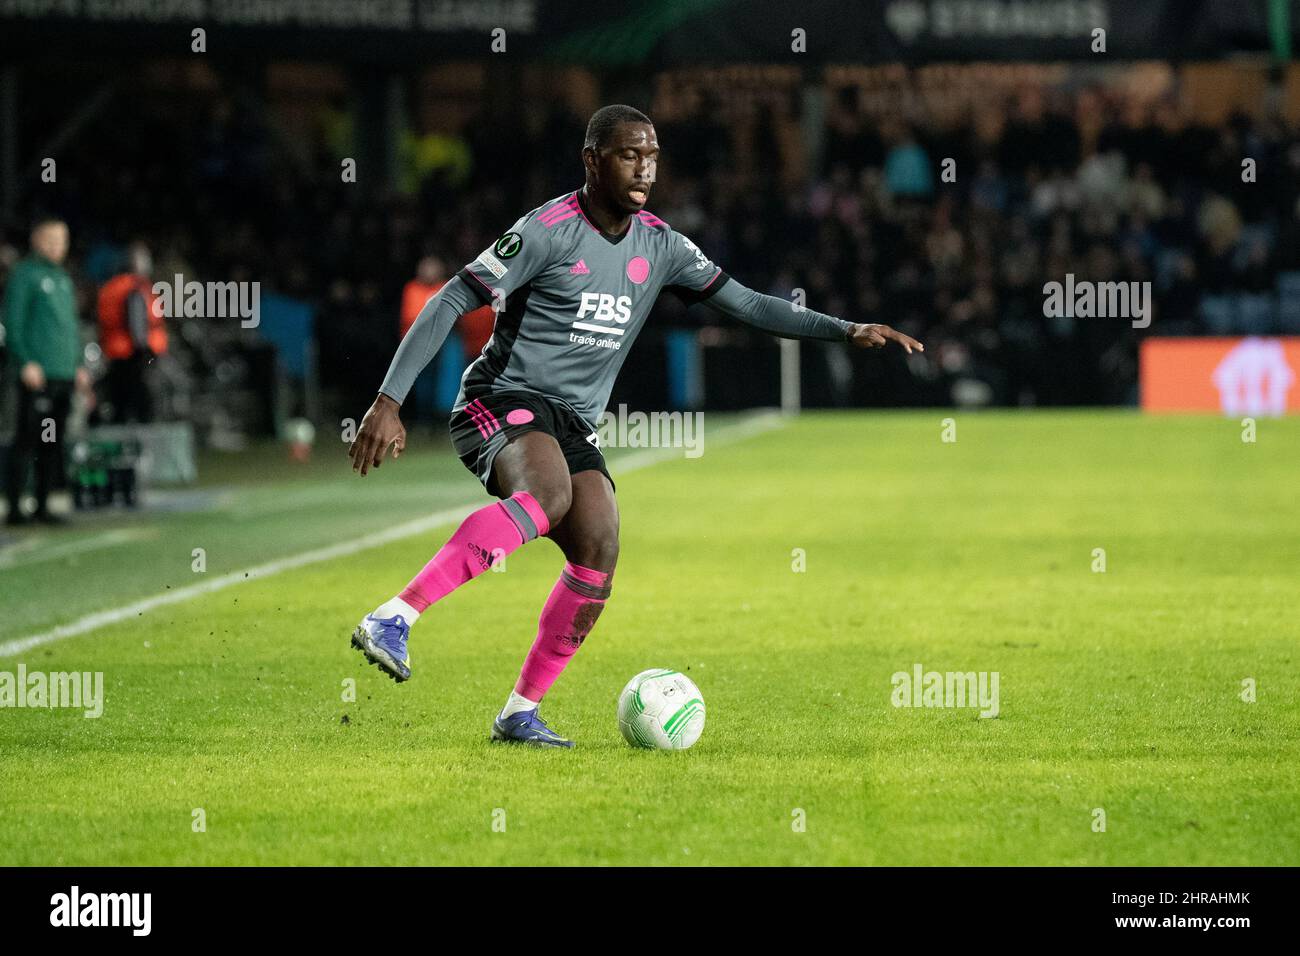 Randers, Denmark. 24th, February 2022. Boubakary Soumare (42) of Leicester City seen during the UEFA Europa Conference League match between Randers FC and Leicester City at Cepheus Park in Randers. (Photo credit: Gonzales Photo - Balazs Popal). Stock Photo